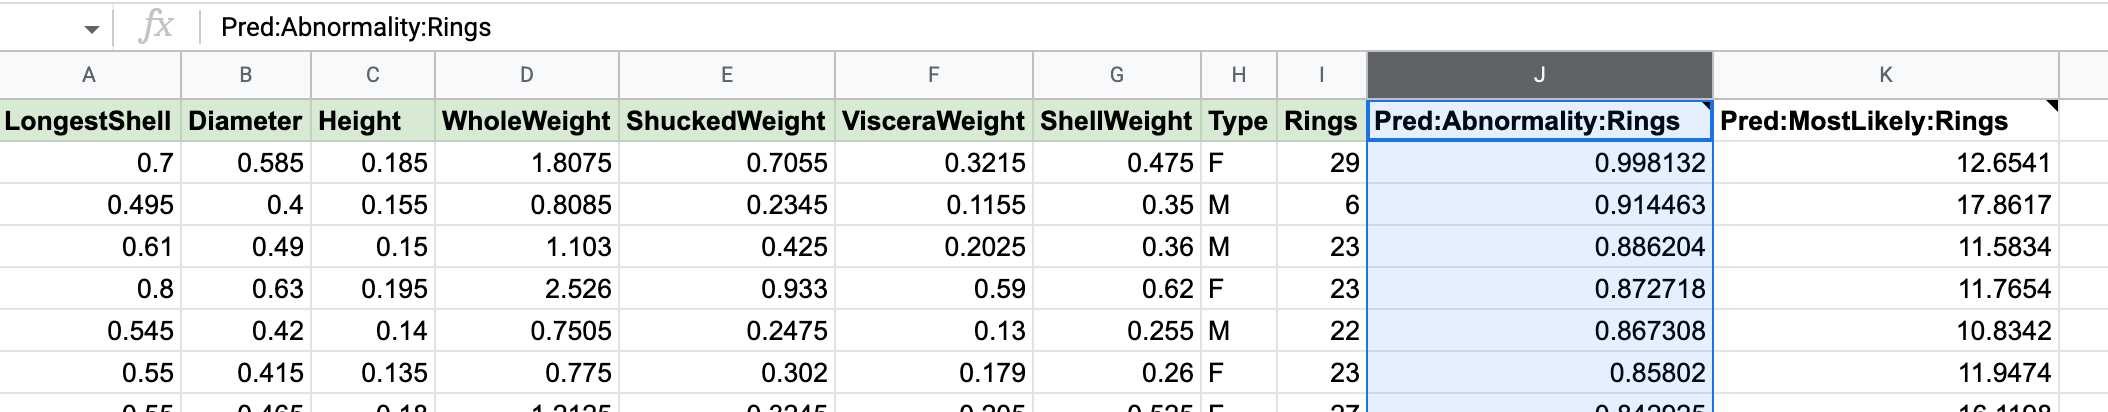 Screenshot of the spreadsheet sorted by predicted abnormality values